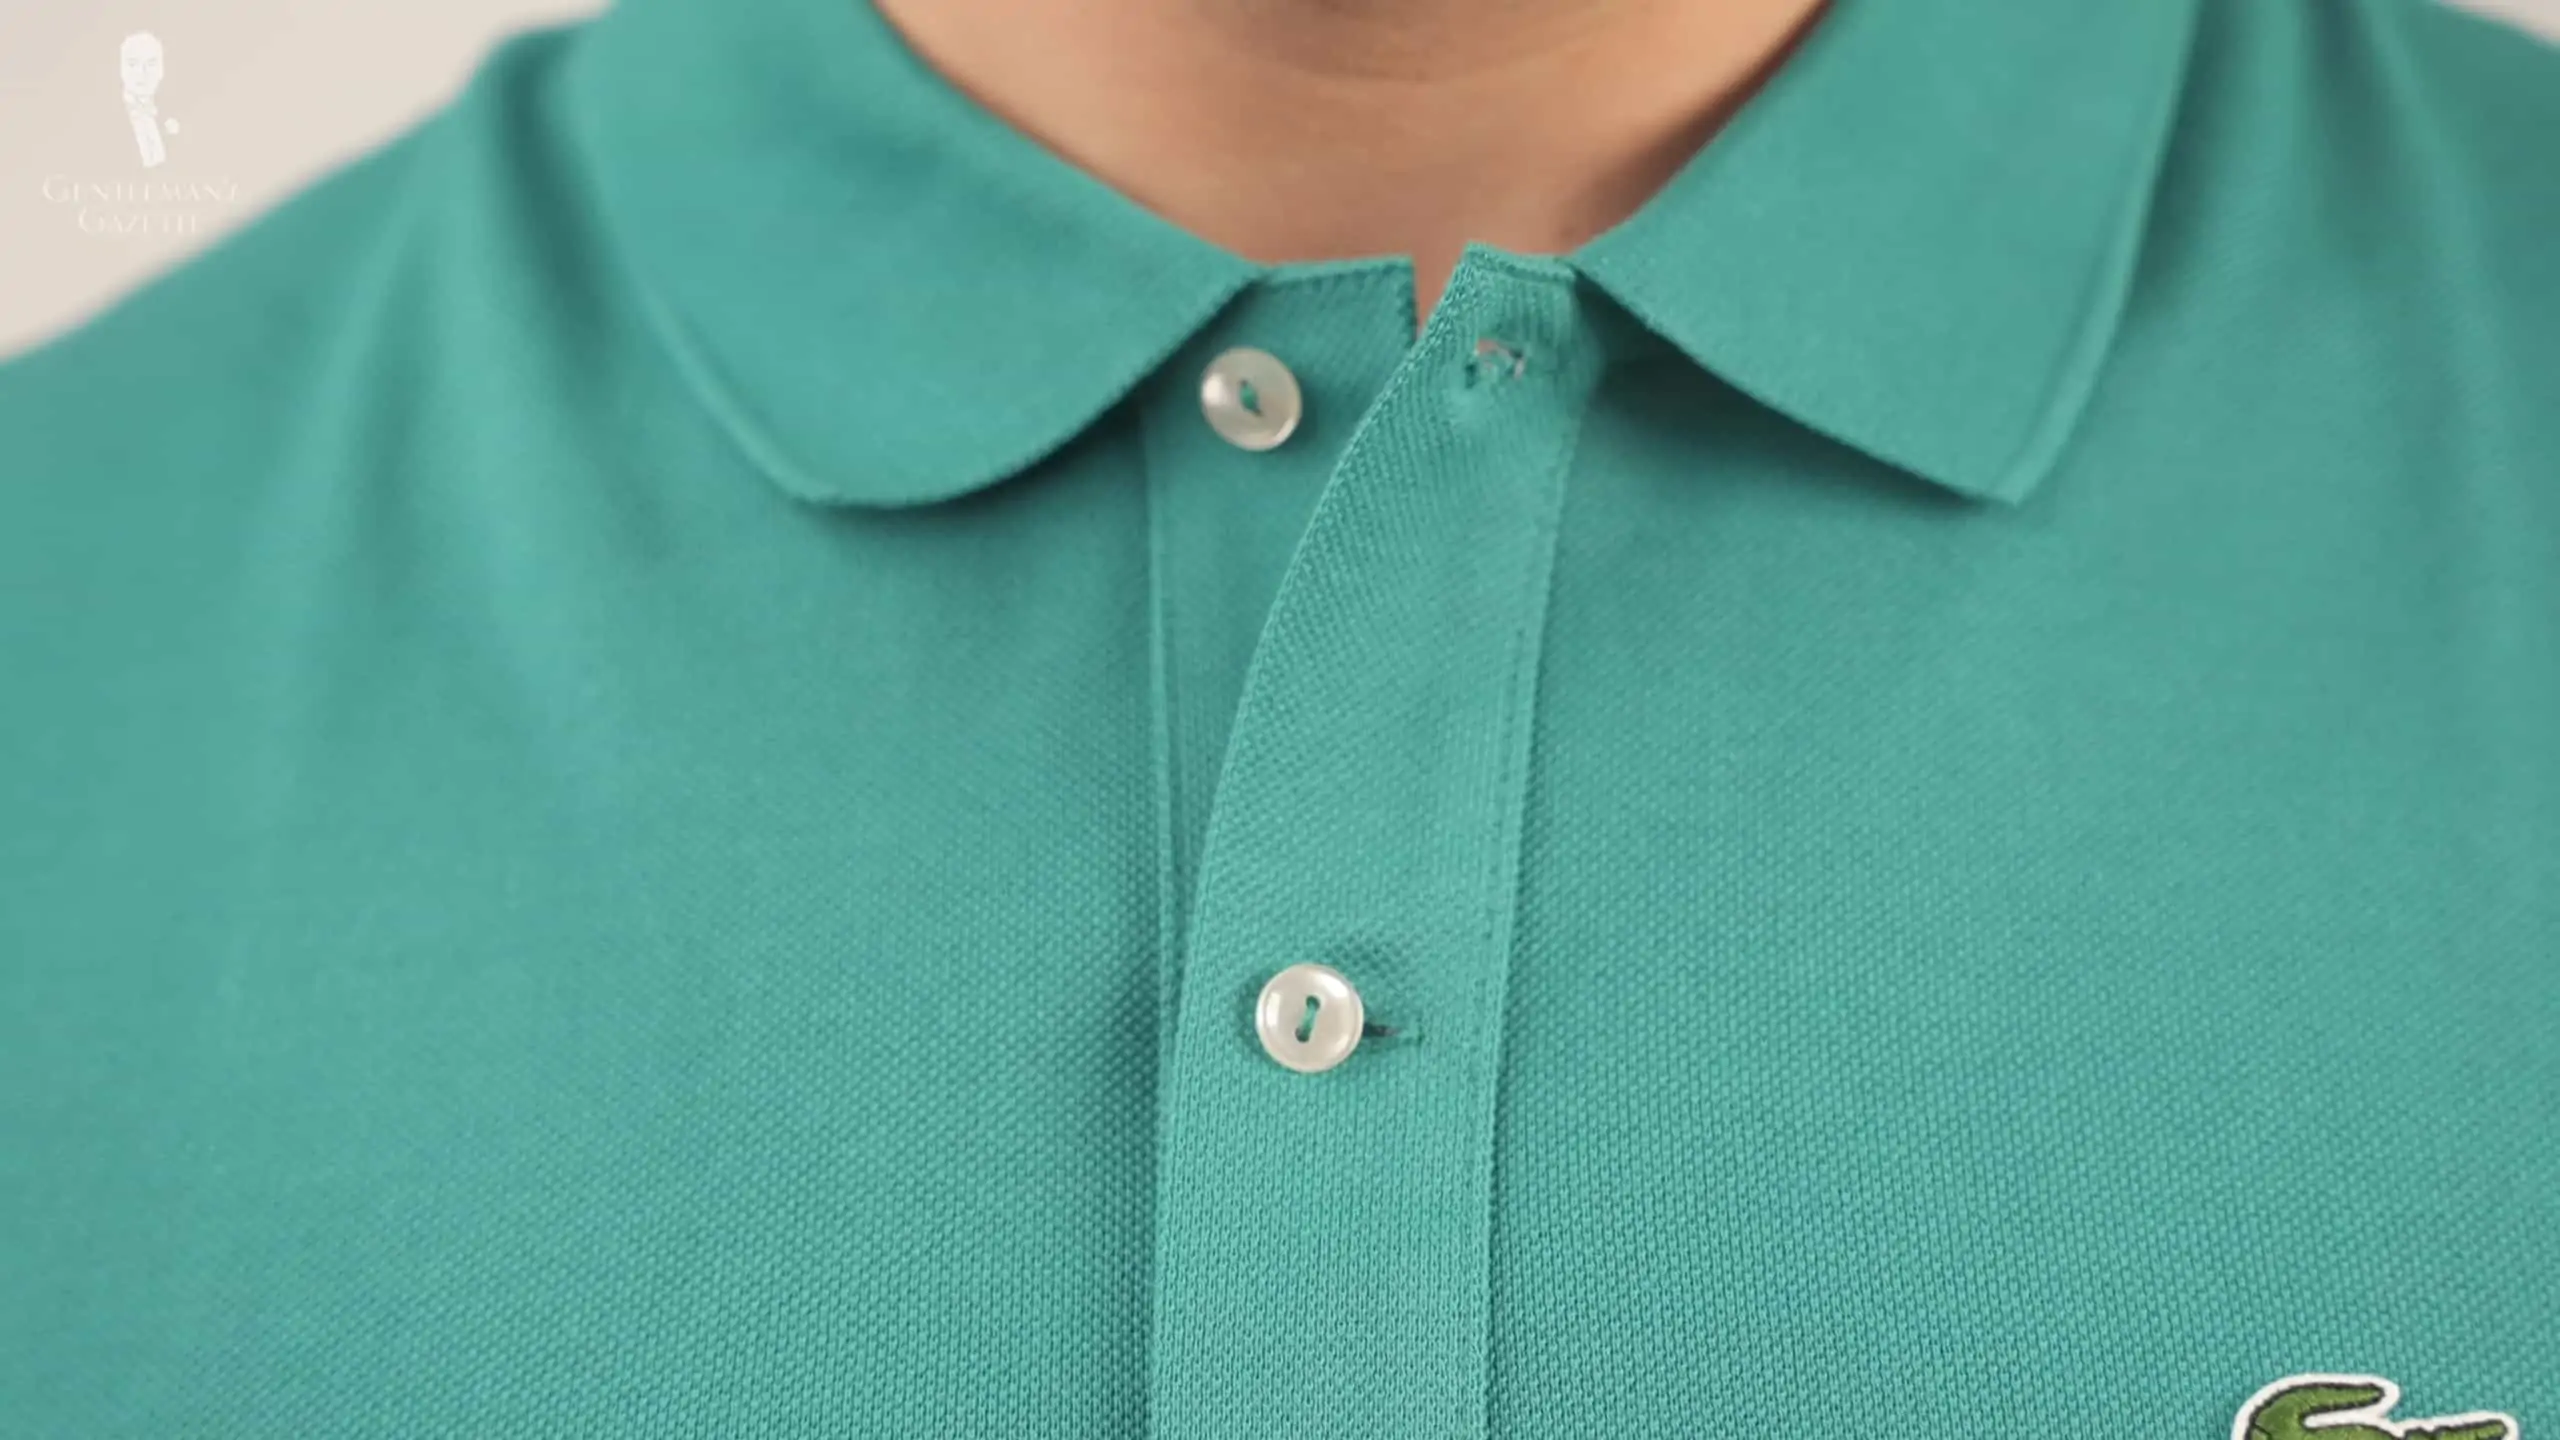 Lacoste Polo Is It Worth It? (In-Depth Review)